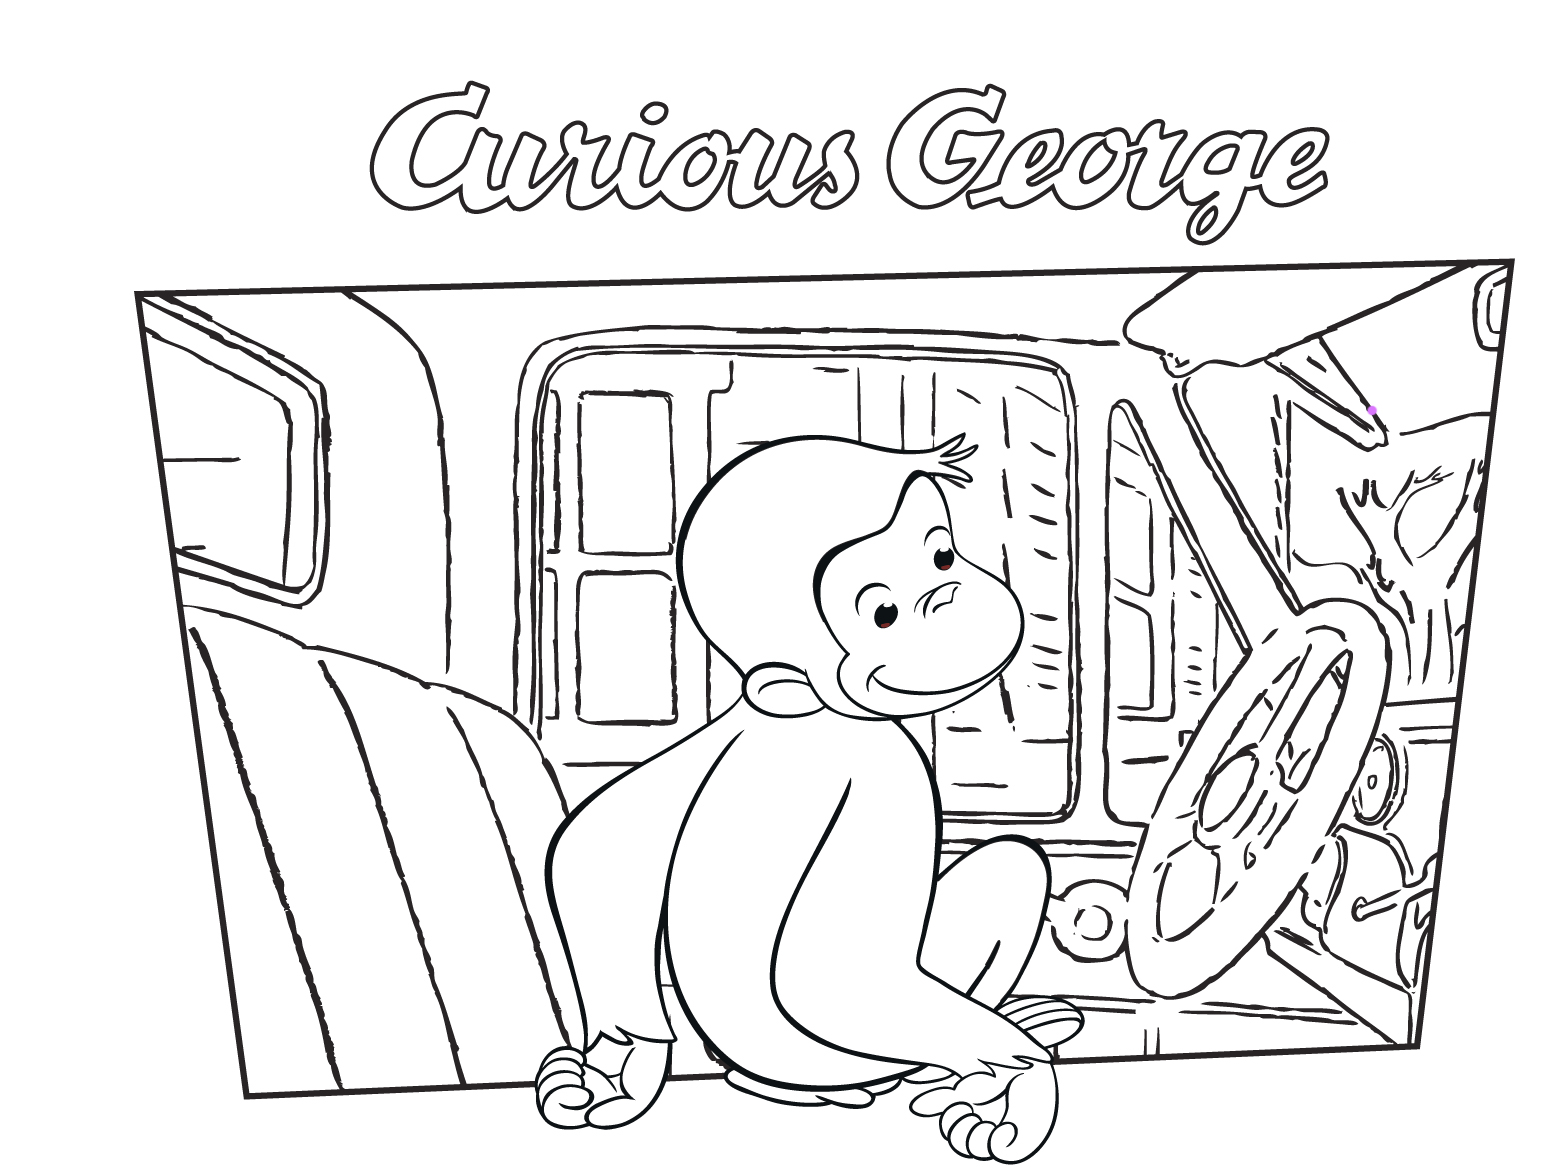 Curious George Coloring Pages and Book | UniqueColoringPages